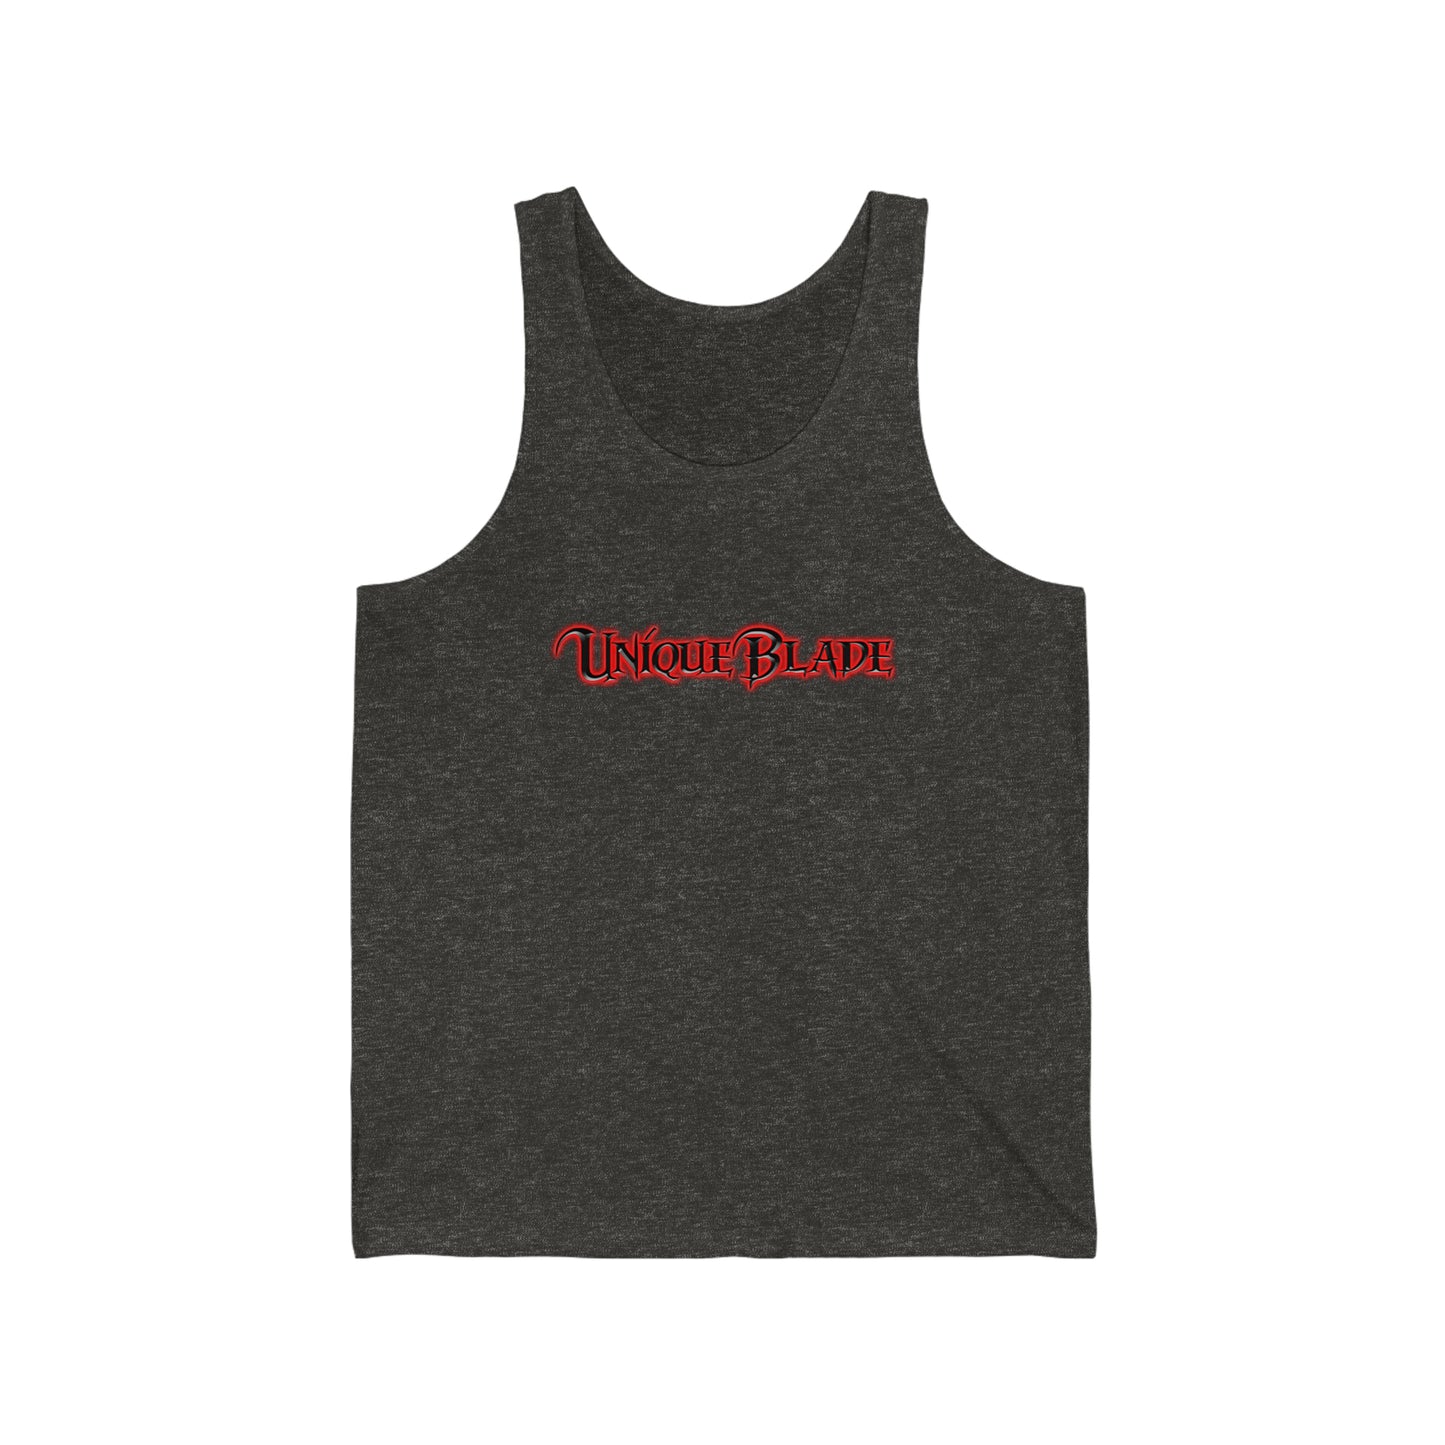 Unisex Jersey Tank - Sleeveless and versatile tank top suitable for both men and women, perfect for casual wear or workouts